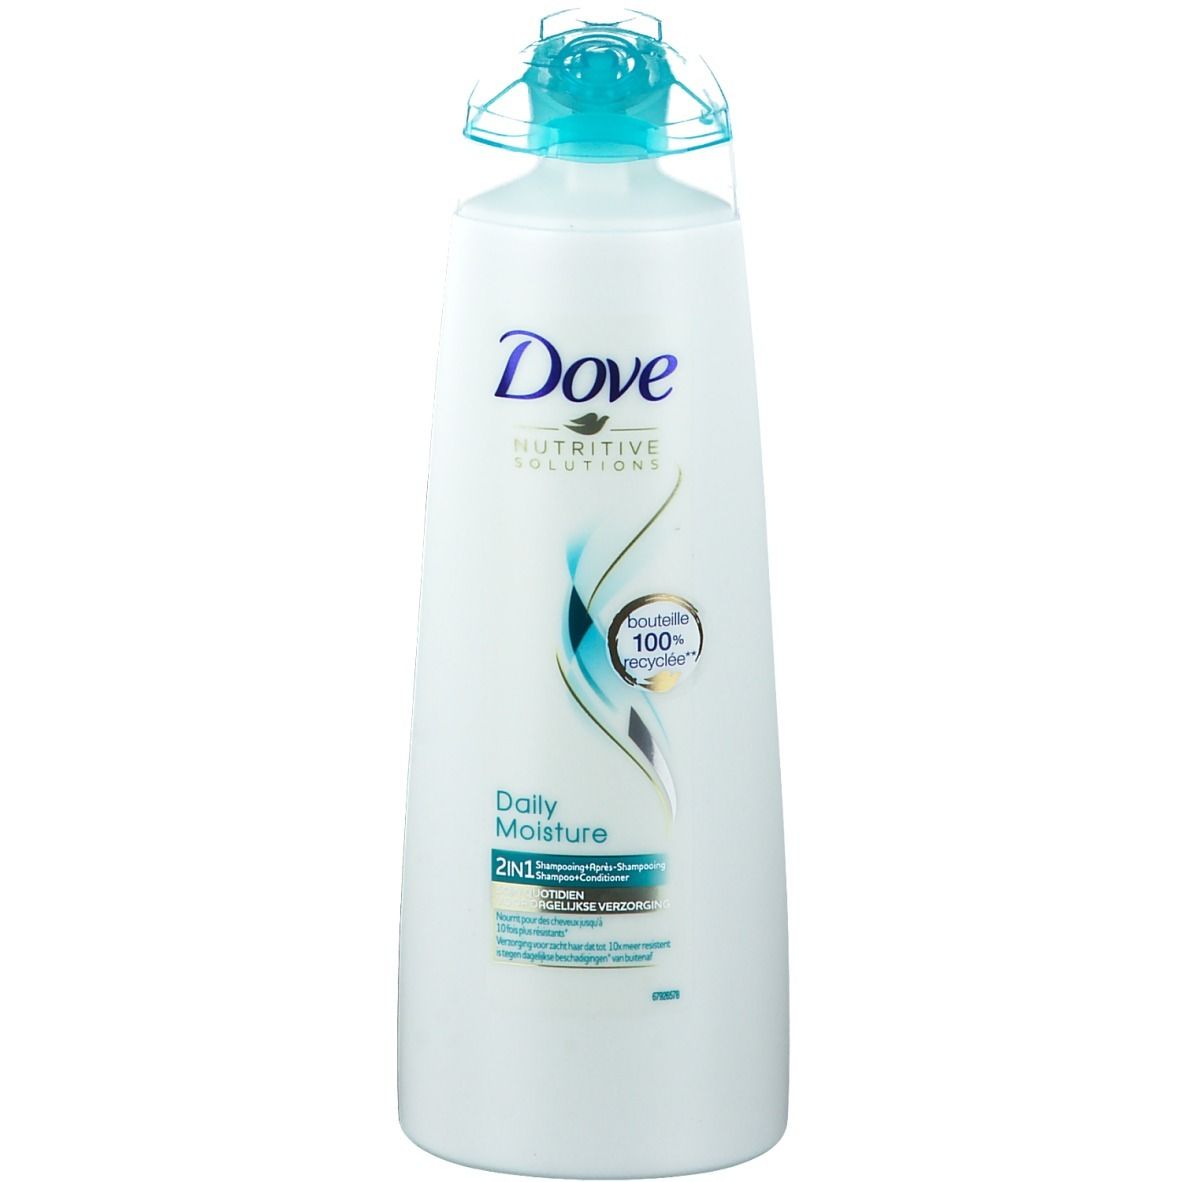 Image of Dove Daily Moisture 2in1 Shampoo